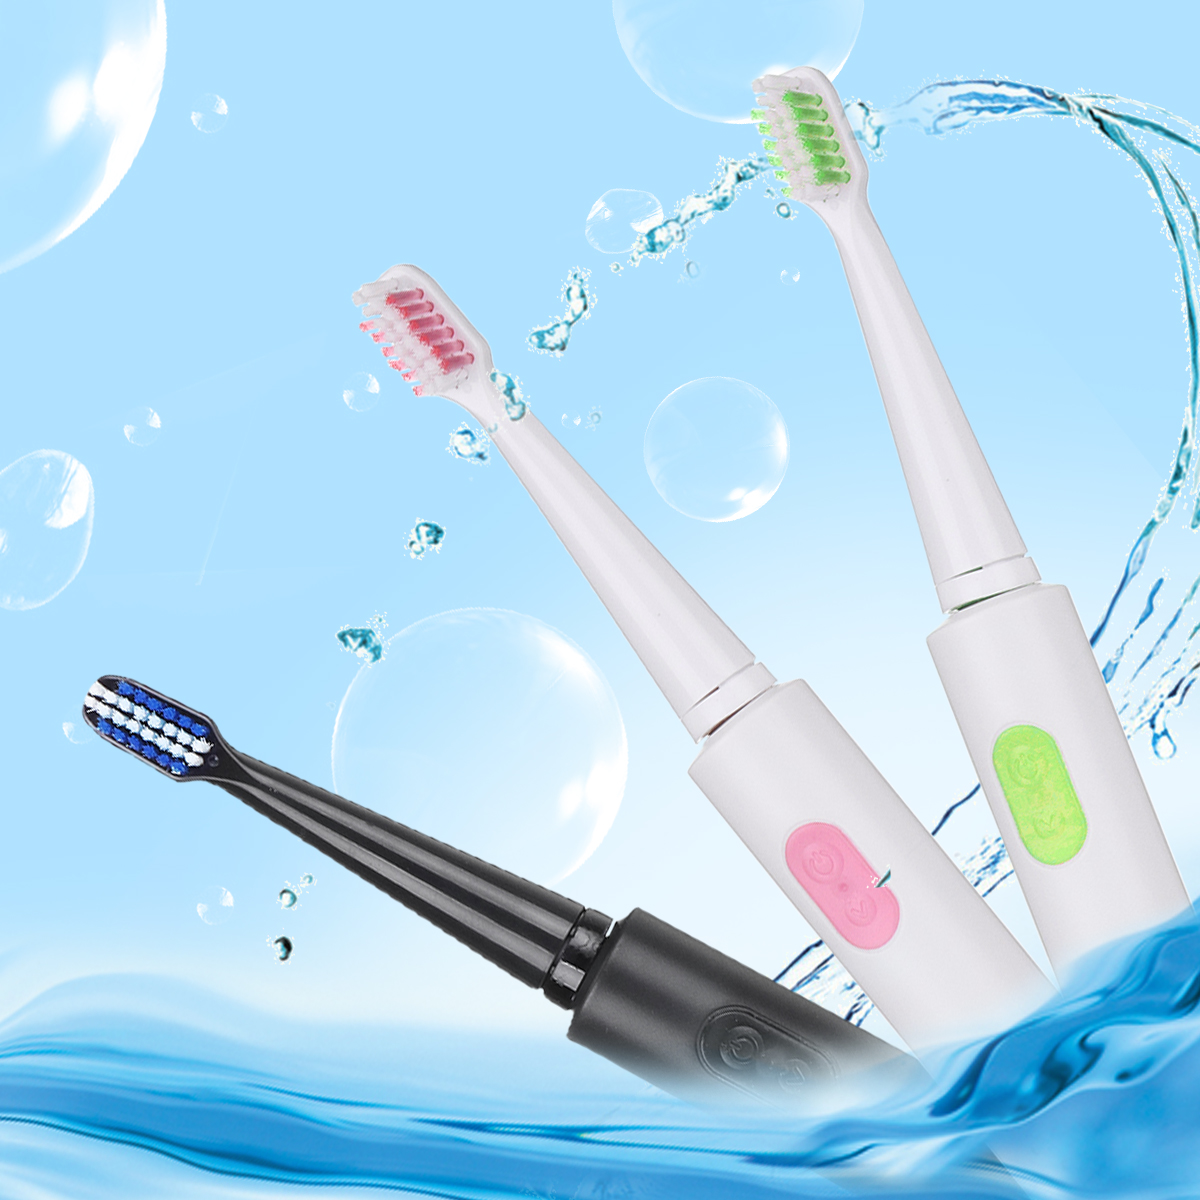 Travel Rechargeable Ultrasonic Electric Toothbrush Waterproof 3 Cleaning Mode Teeth Clean+ 4 Heads